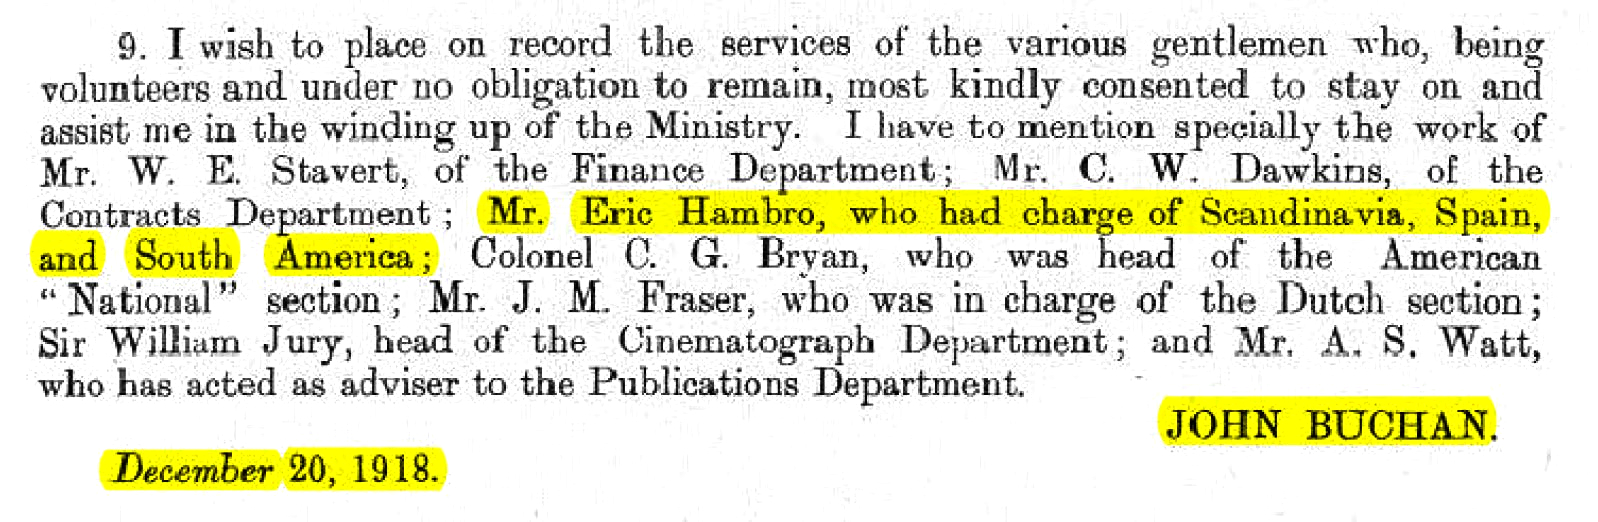 John Buchan, Minister of Information/Propaganda. (Dec. 20, 1918). SECRET, G.-229: Report on the Liquidation of the Ministry of Information, Transfer to the Foreign Office War Cabinet, G-229, Cat. Ref. CAB -24/5/29, No. 168, 105, 3 pgs. Printed for the War Cabinet. The National Archives.